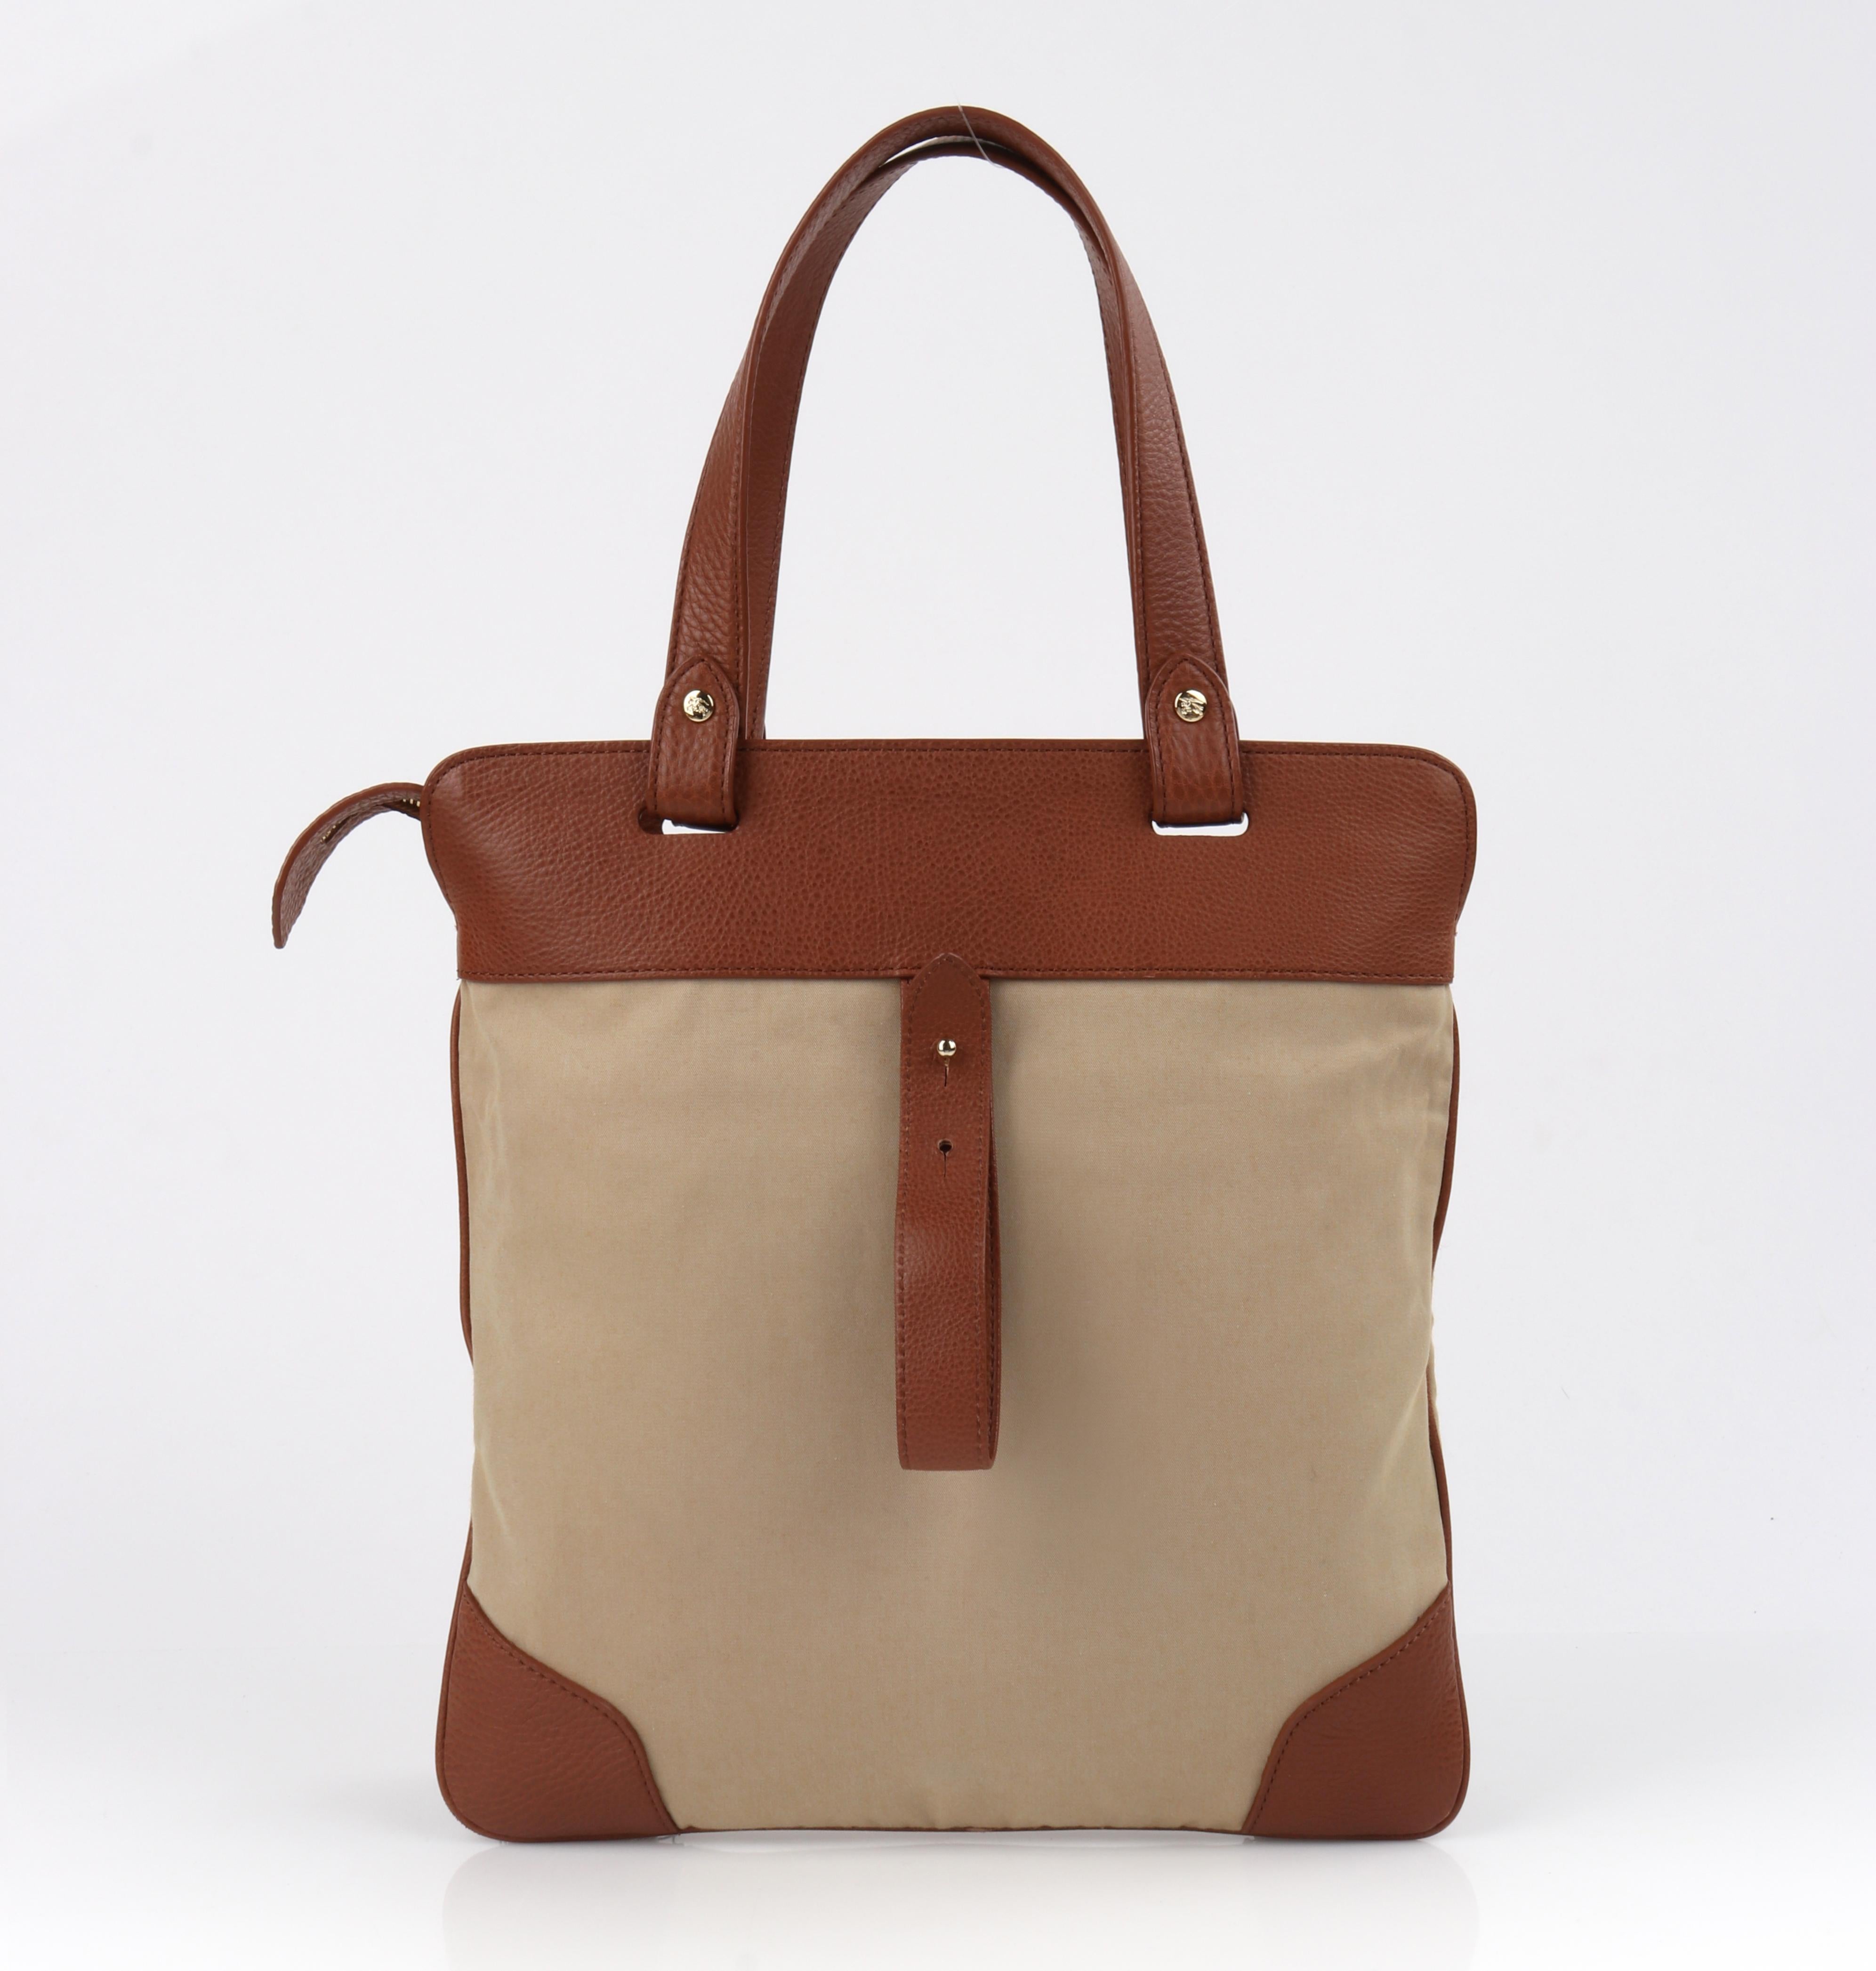 BURBERRY Almond Brown Leather Embroidered Signature Tote Shopper Bag
  
Brand / Manufacturer: Burberry
Designer: Christopher Bailey
Style: Tote / shoulder bag
Color(s): Shades of beige, almond brown (exterior); shades of beige, brown, white, black,